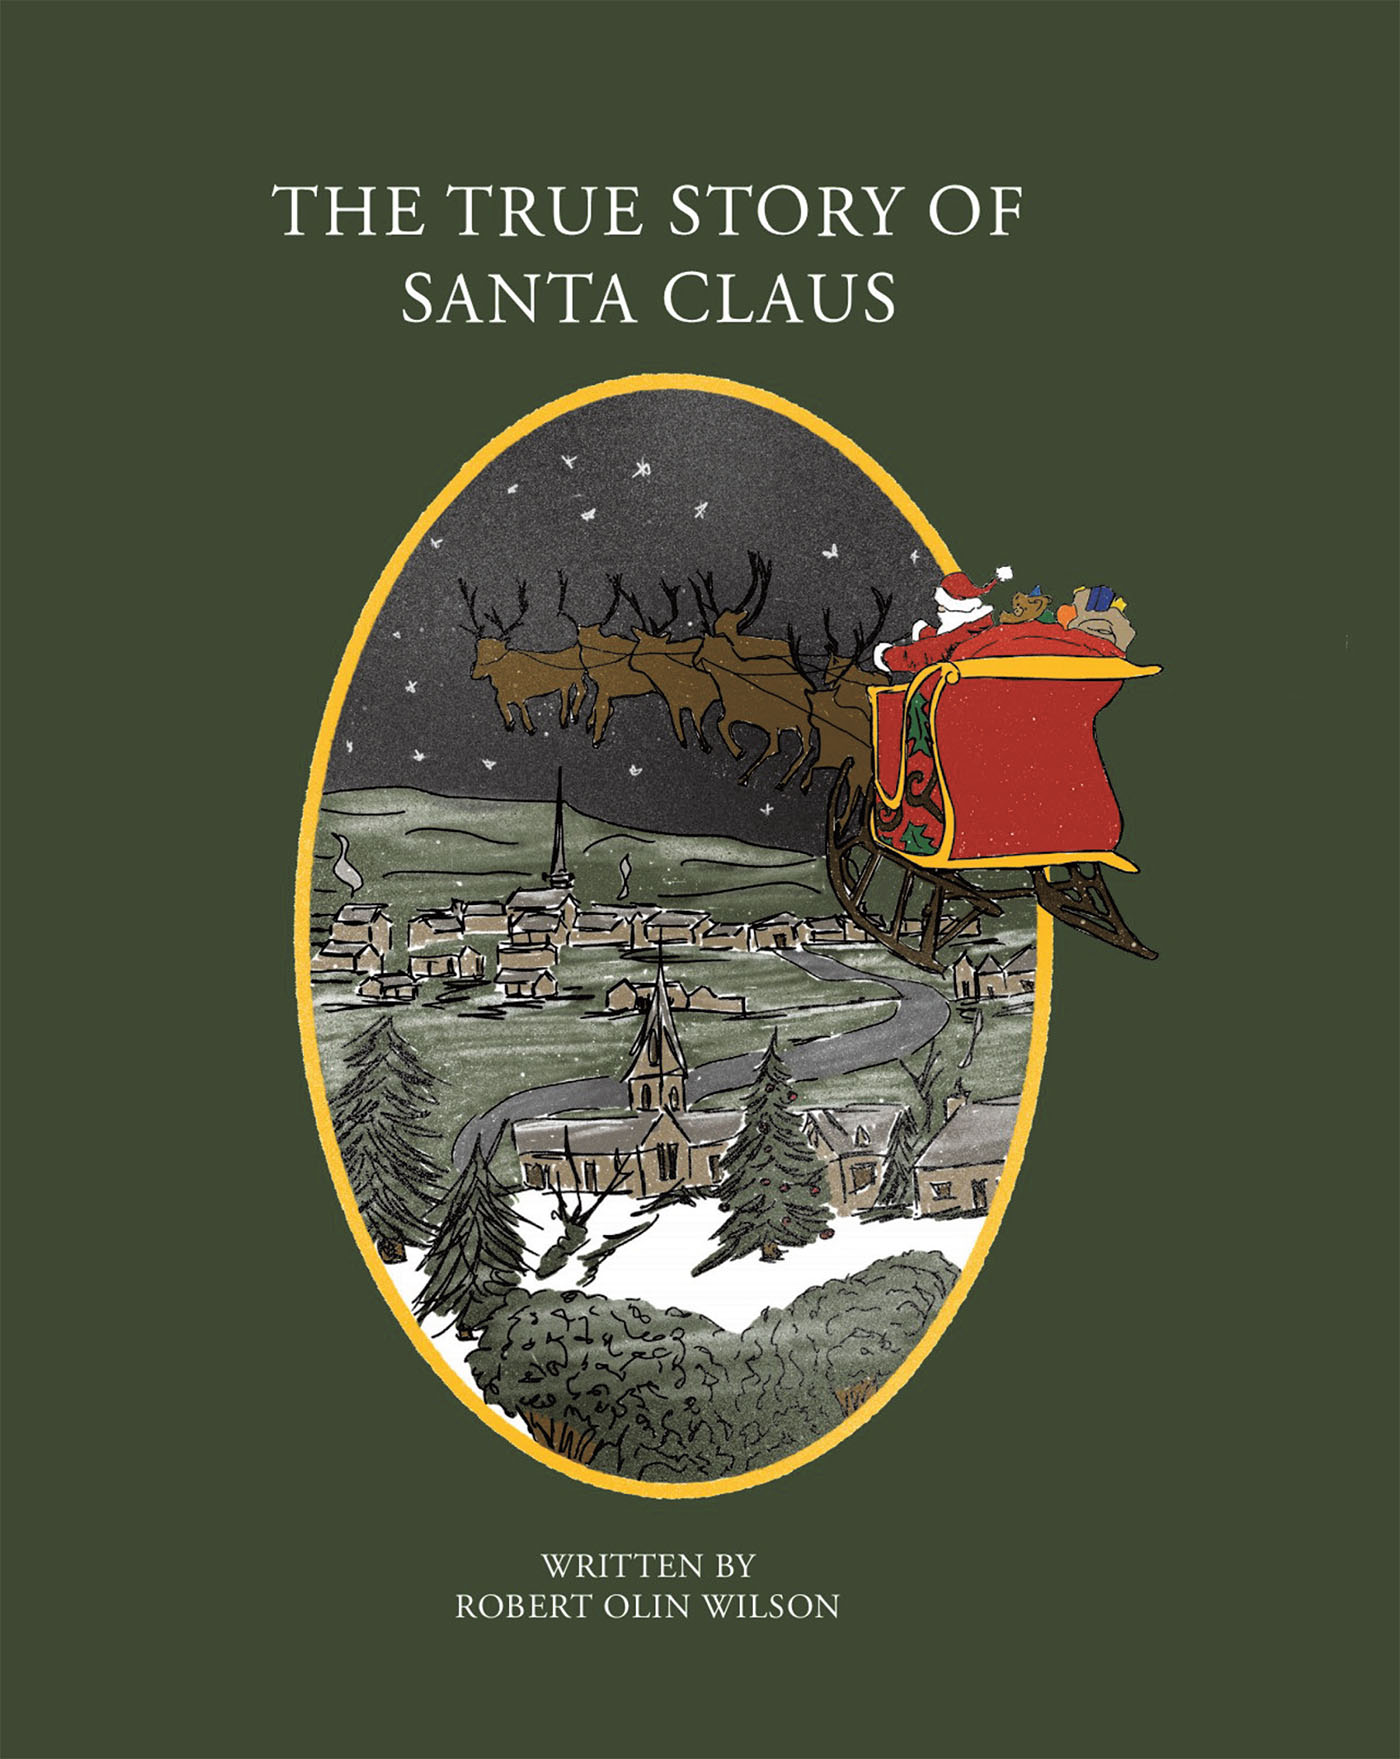 Author Robert Olin Wilson’s New Book, "The True Story of Santa Claus," is an Engaging Tale That Reveals How Kris Kringle Was Divinely Called to Become Santa Claus